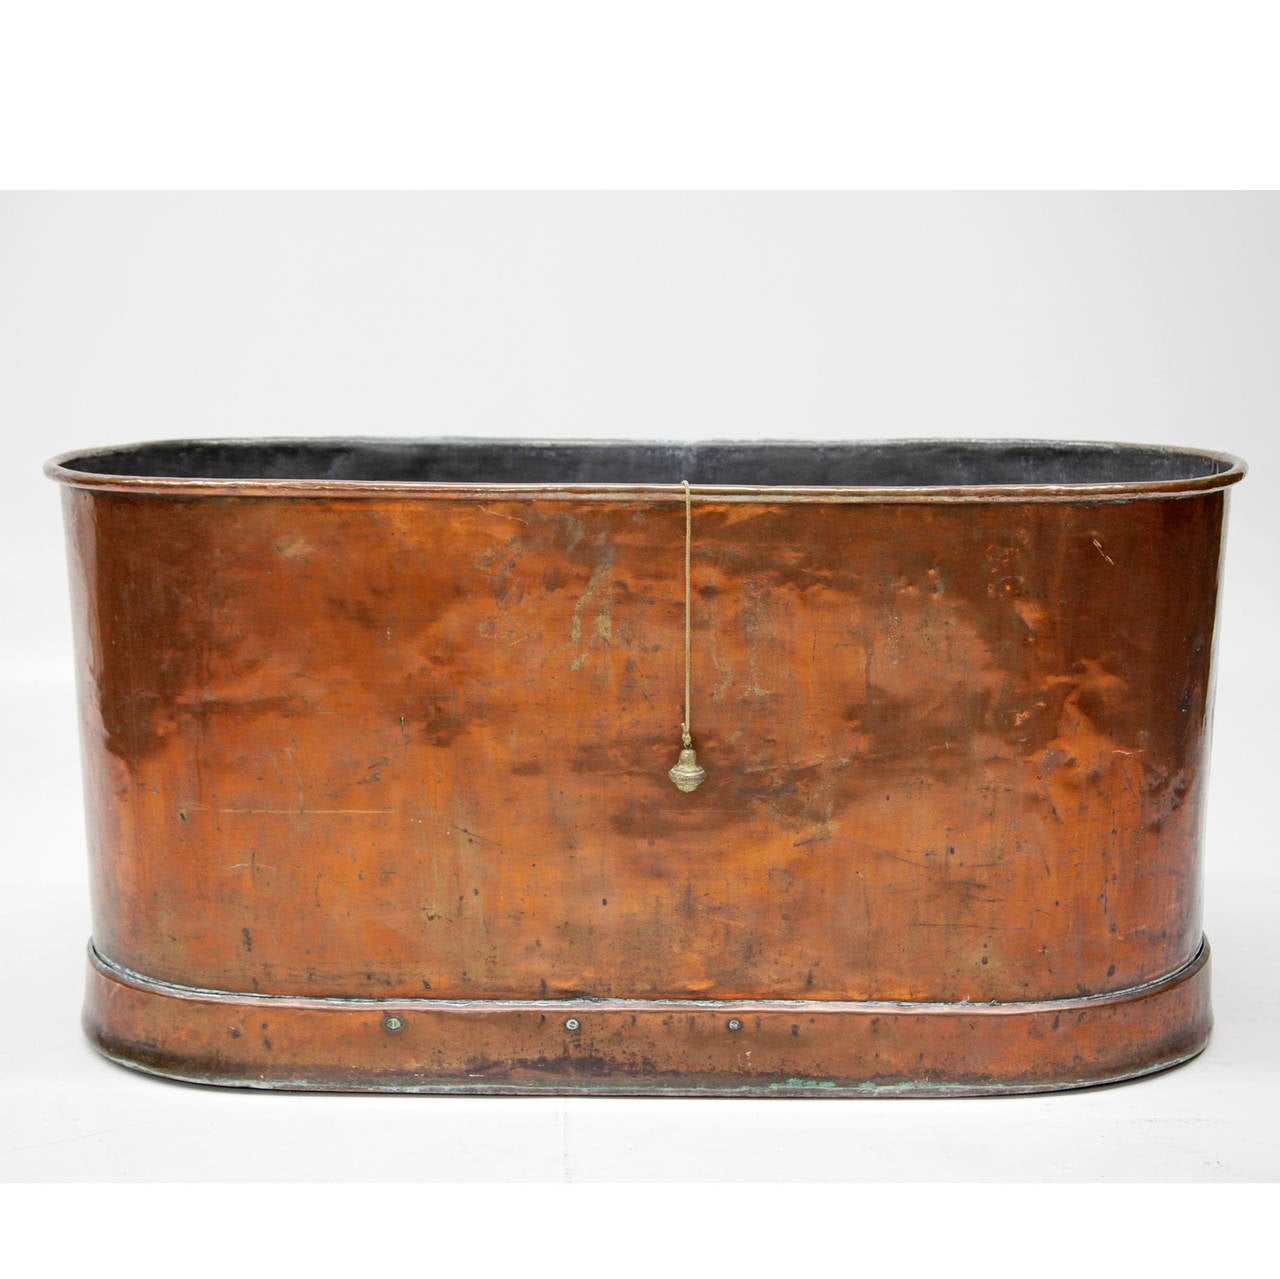 Nice french copper Bathtub from the early 19th Century.
Provenance: Frenche Castle